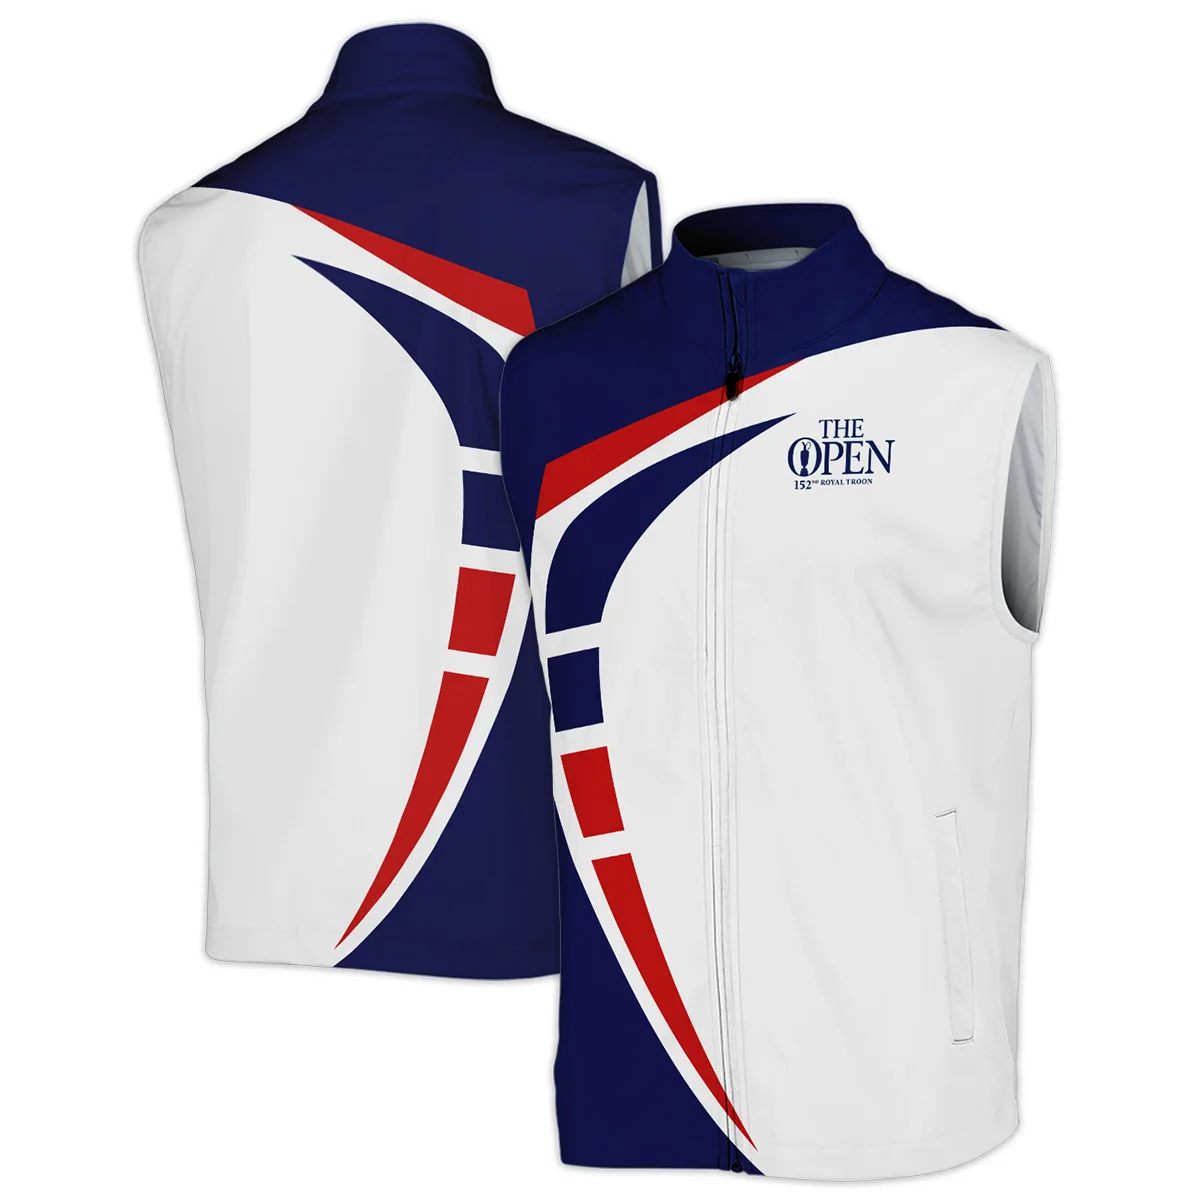 152nd Open Championship Titleist White Blue Red Pattern Background Zipper Hoodie Shirt All Over Prints HOTOP270624A03TLZHD